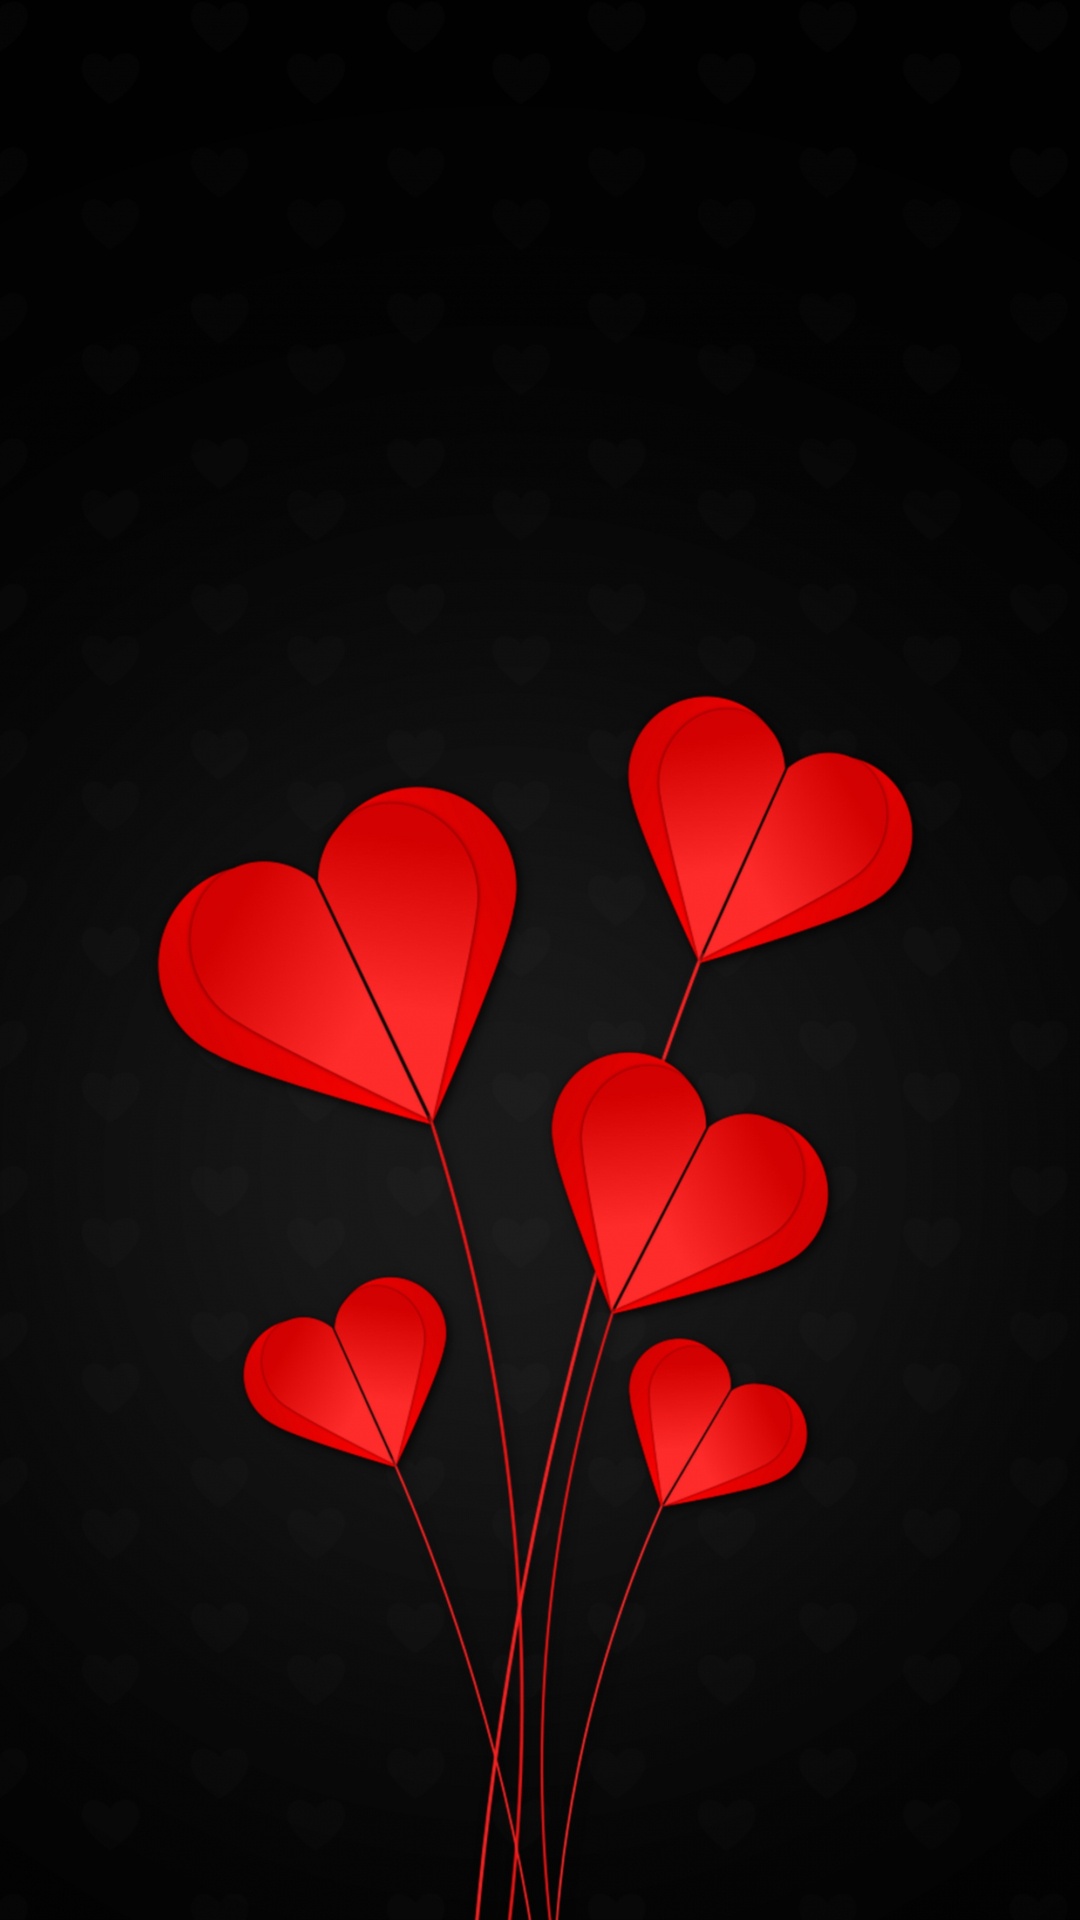 Heart, Red, Petal, Love, Valentines Day. Wallpaper in 1080x1920 Resolution